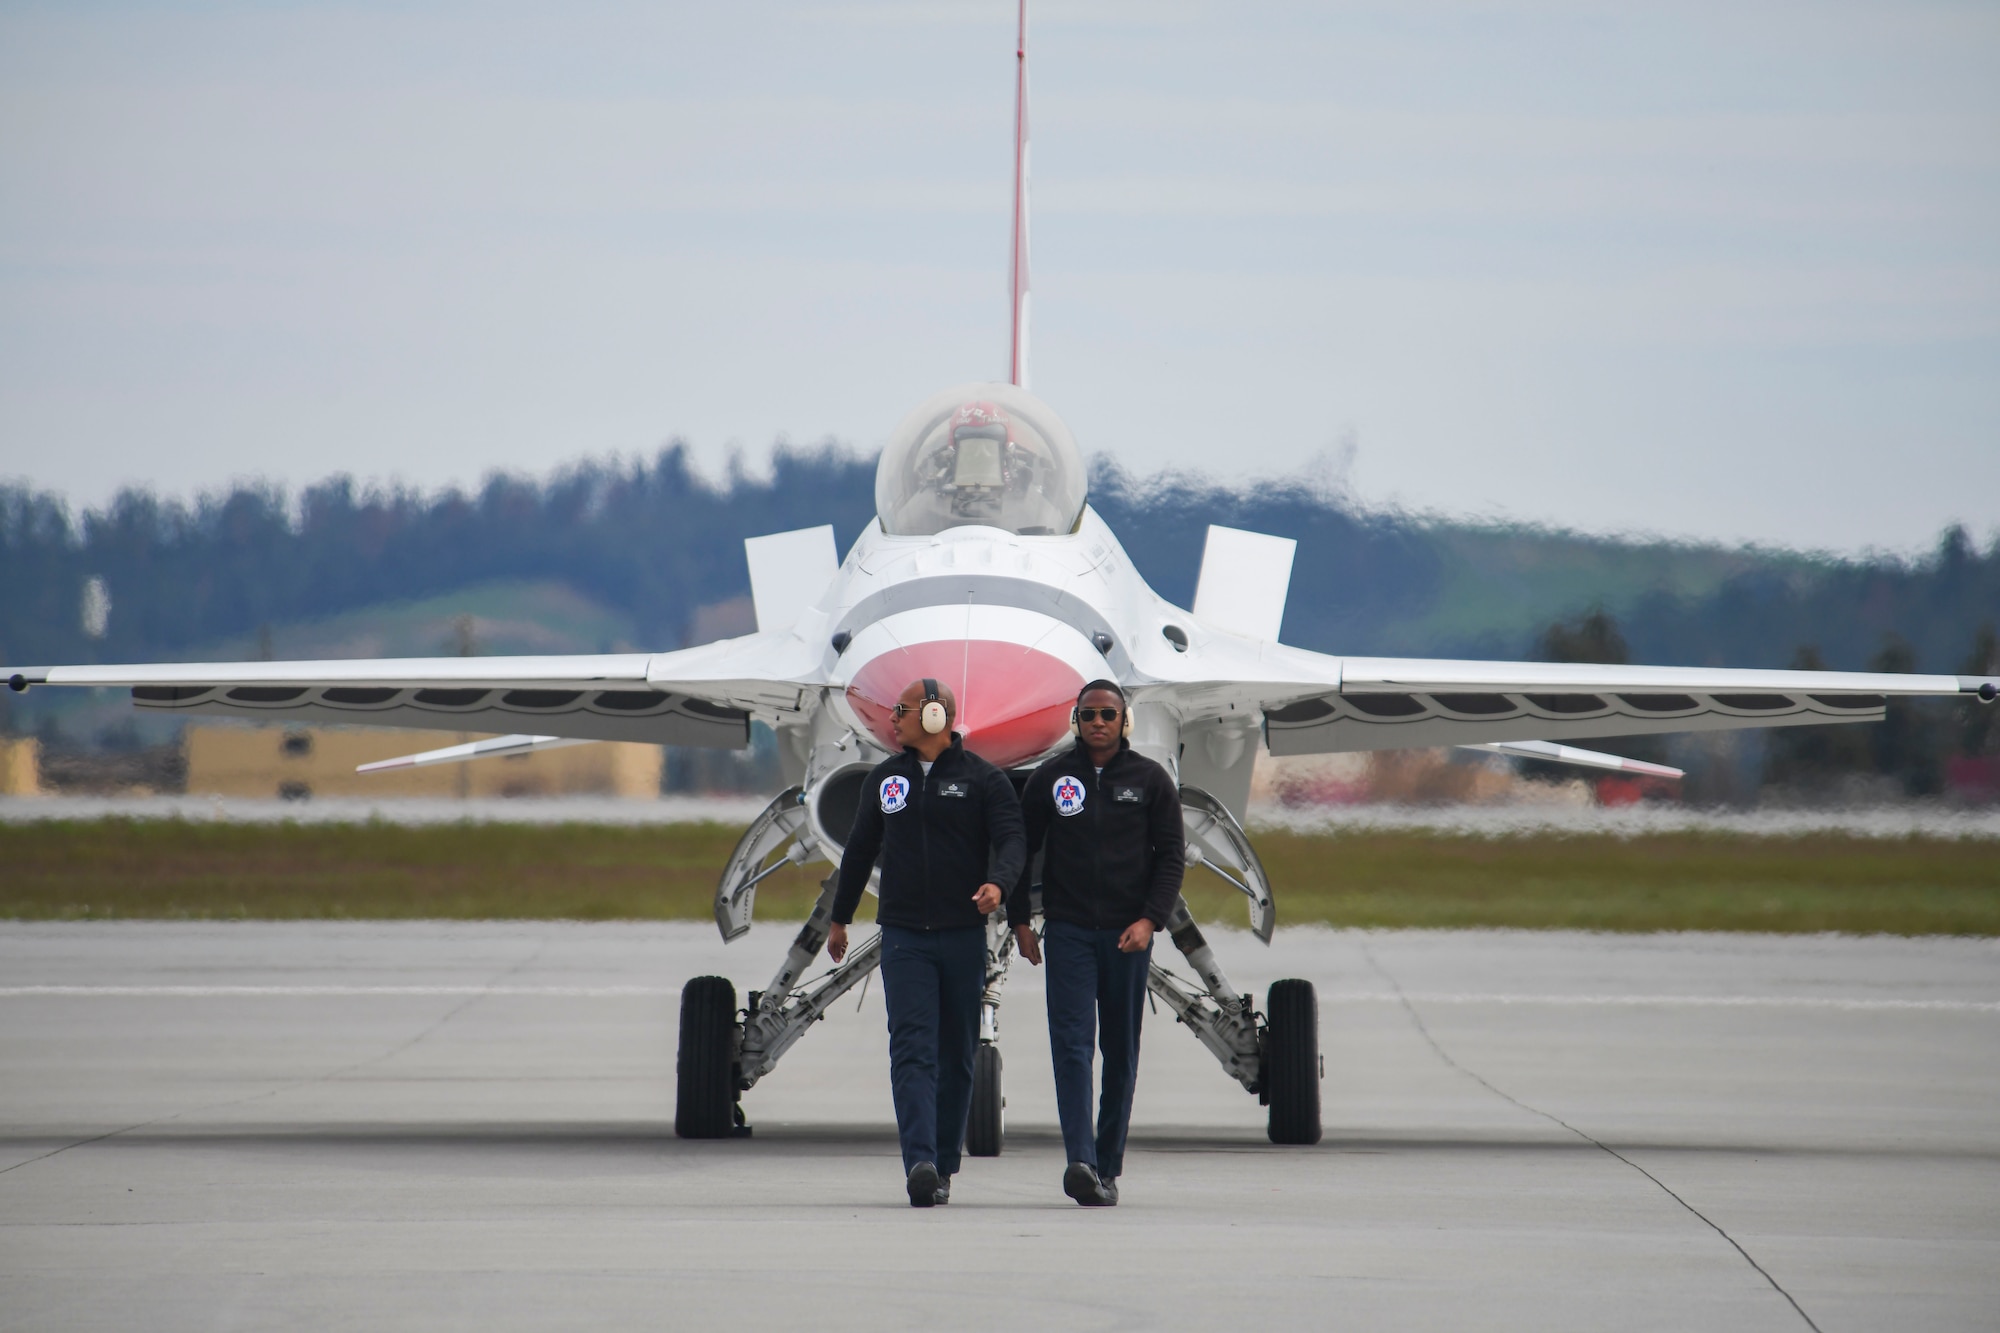 The U.S. Air Force Thunderbirds F-16 Falcons are displayed on the flightline during Fairchild Skyfest 2022 airshow at Fairchild Air Force Base, Washington, May 14, 2022. Fairchild Skyfest 2022 gave the Inland Northwest a chance to meet members of Team Fairchild and see the U.S. Air Force's premier air refueling wing in action during a simulated KC-135 Stratotanker low-pass refuel of a C-17 Globemaster III. (U.S. Air Force photo by Senior Airman Kiaundra Miller)